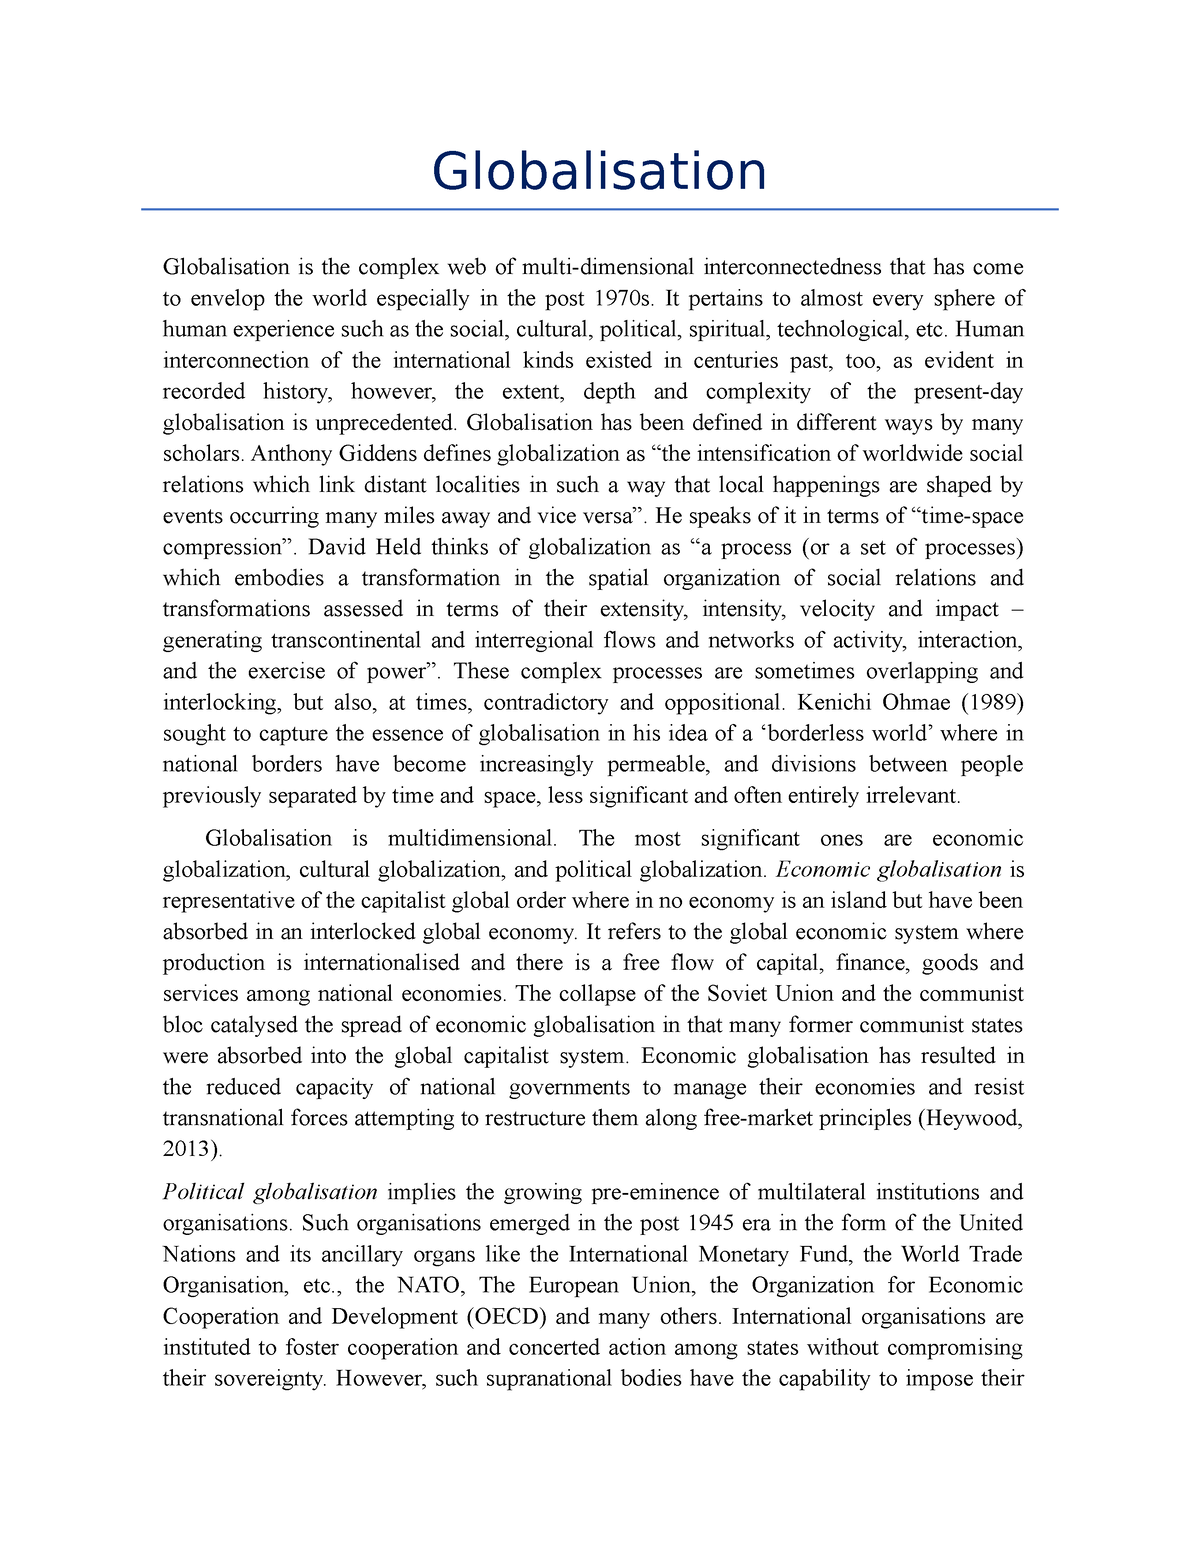 phd thesis in globalisation